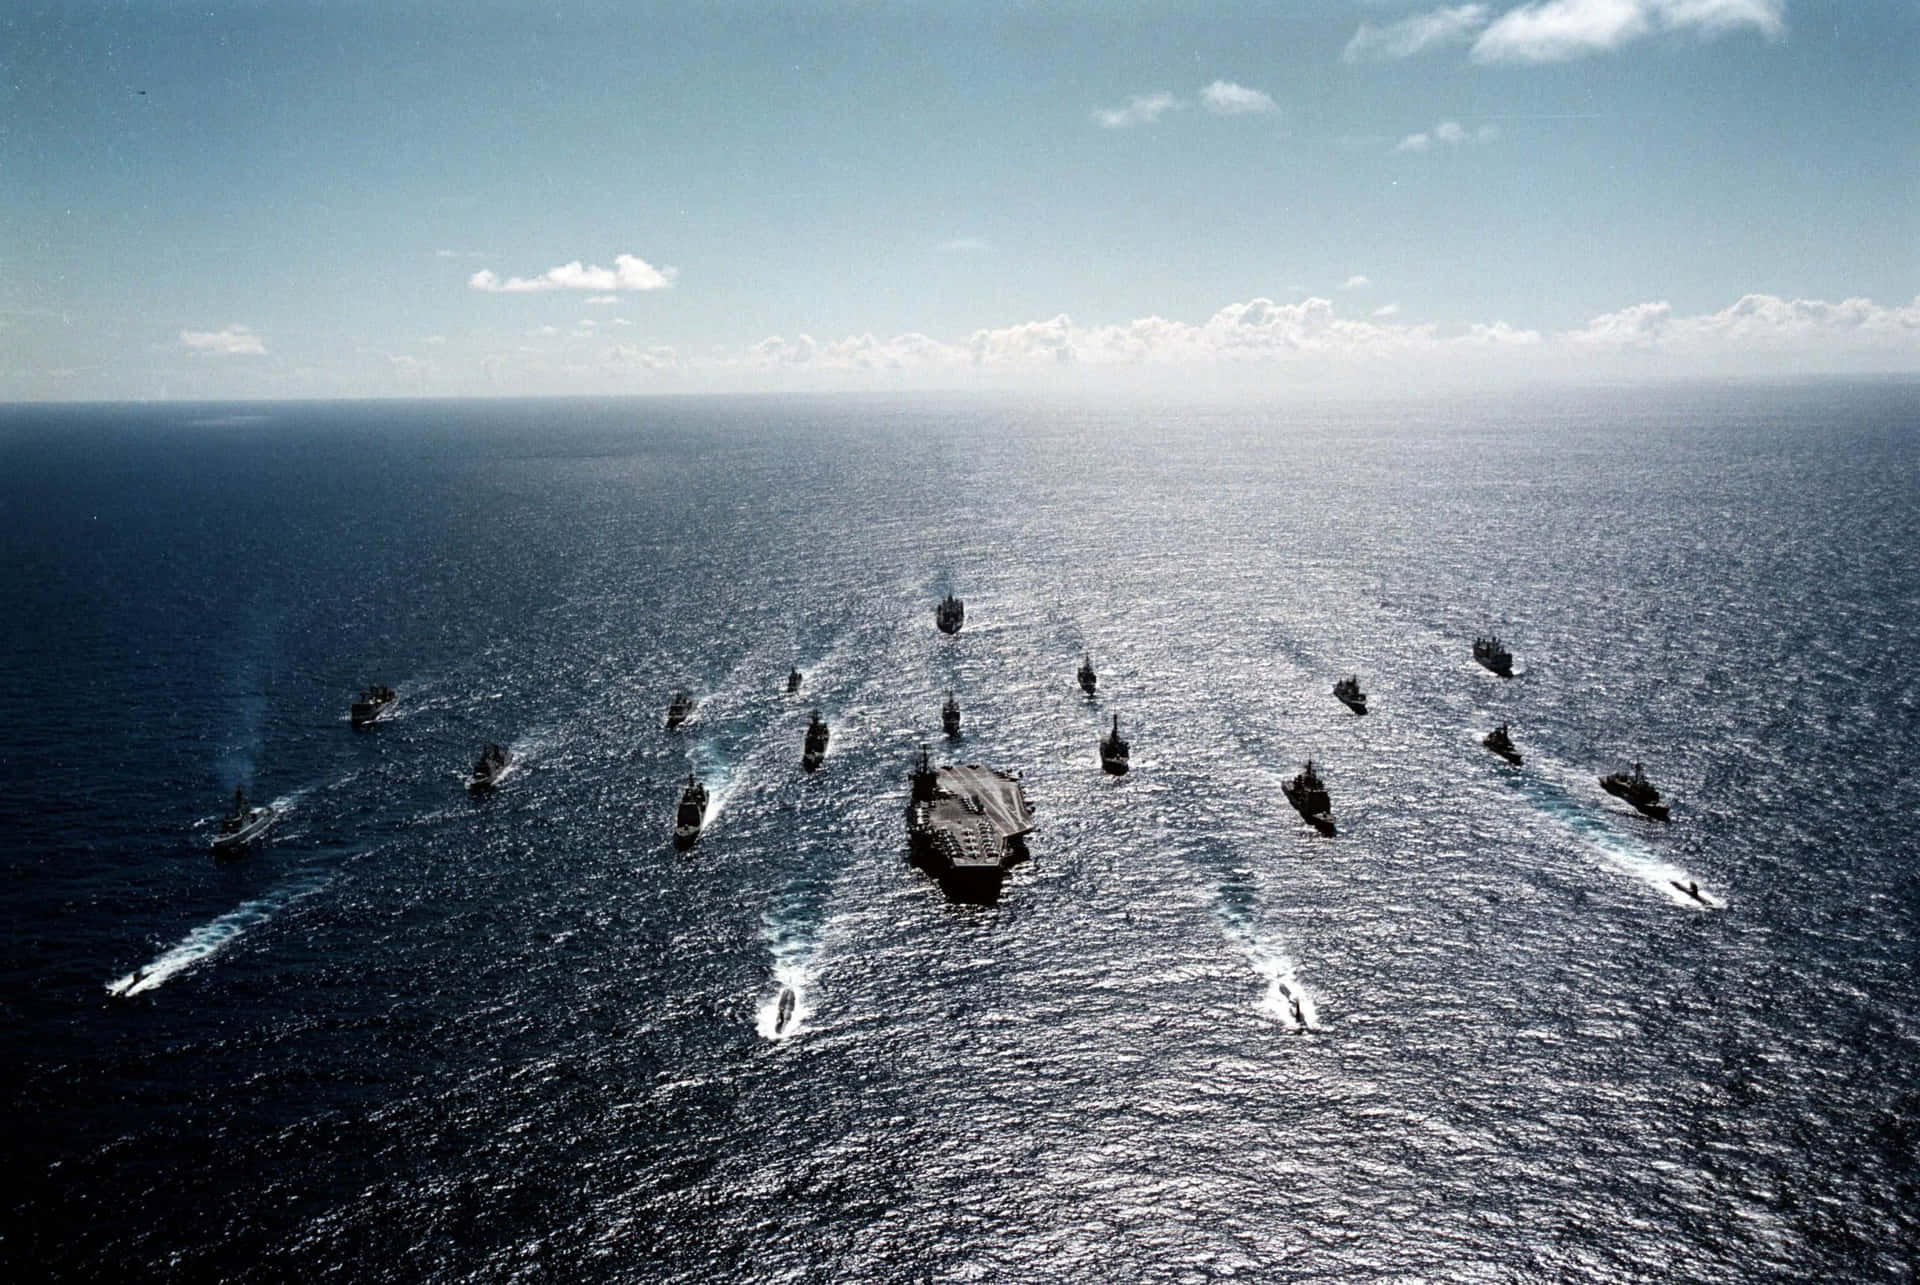 Astonishing aerial view of a navy fleet at sea